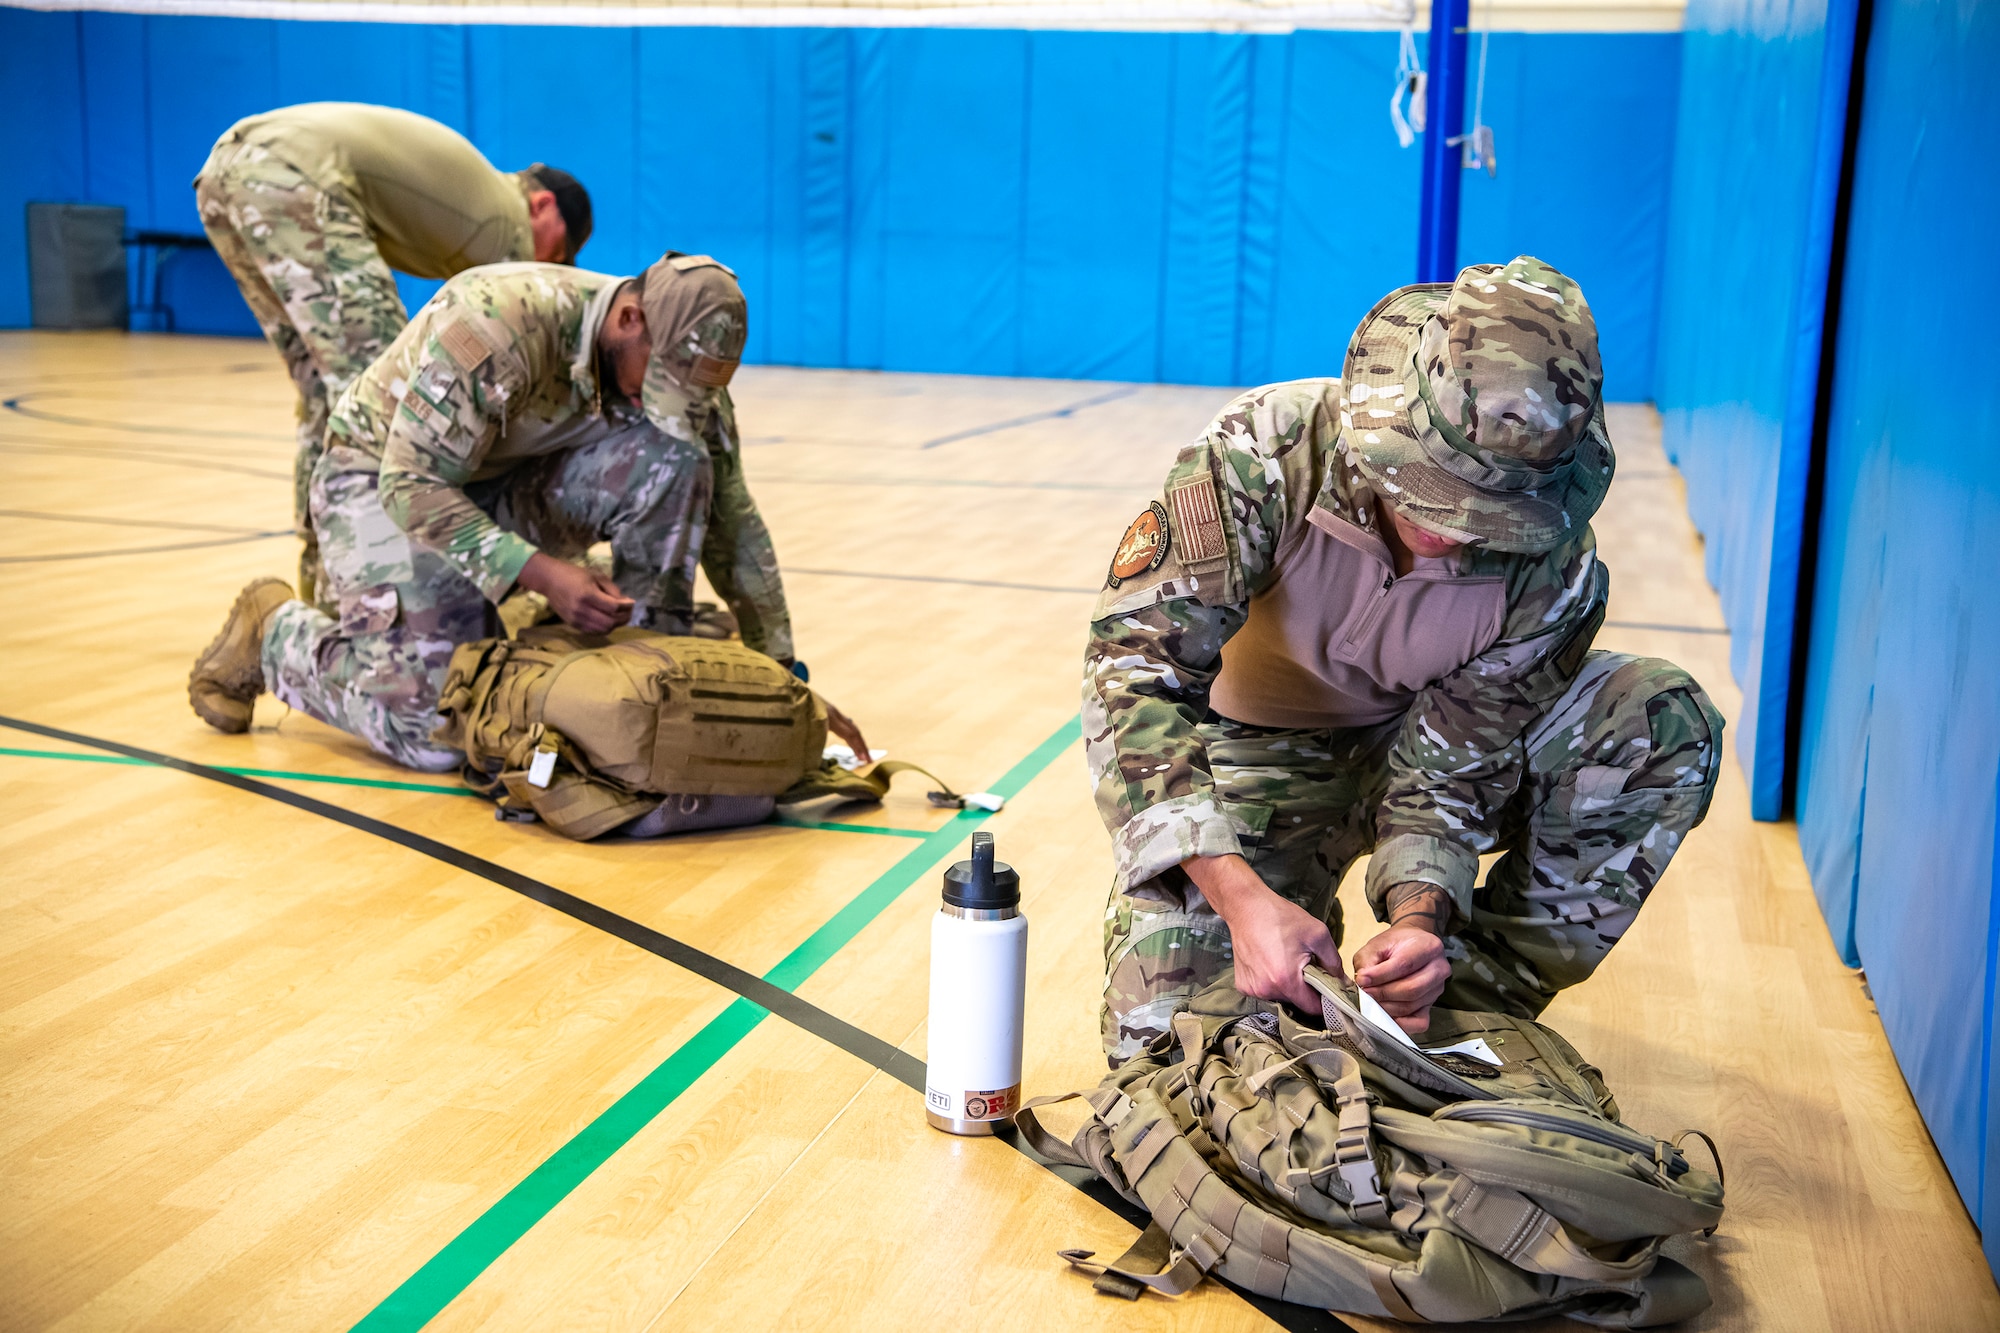 Airmen from the 501st Combat Support Wing, weigh their rucksacks at RAF Molesworth, England, Aug. 18, 2023. Over 100 personnel from the 501st CSW and mission partner units participated in a 25 Kilometer Danish Contingent ruck march, which allowed them to test their physical capabilities and encouraged social bonds between joint forces. The DANCON ruck march has been completed in numerous countries throughout the world since it was established in 1972. (U.S. Air Force photo by Staff Sgt. Eugene Oliver)